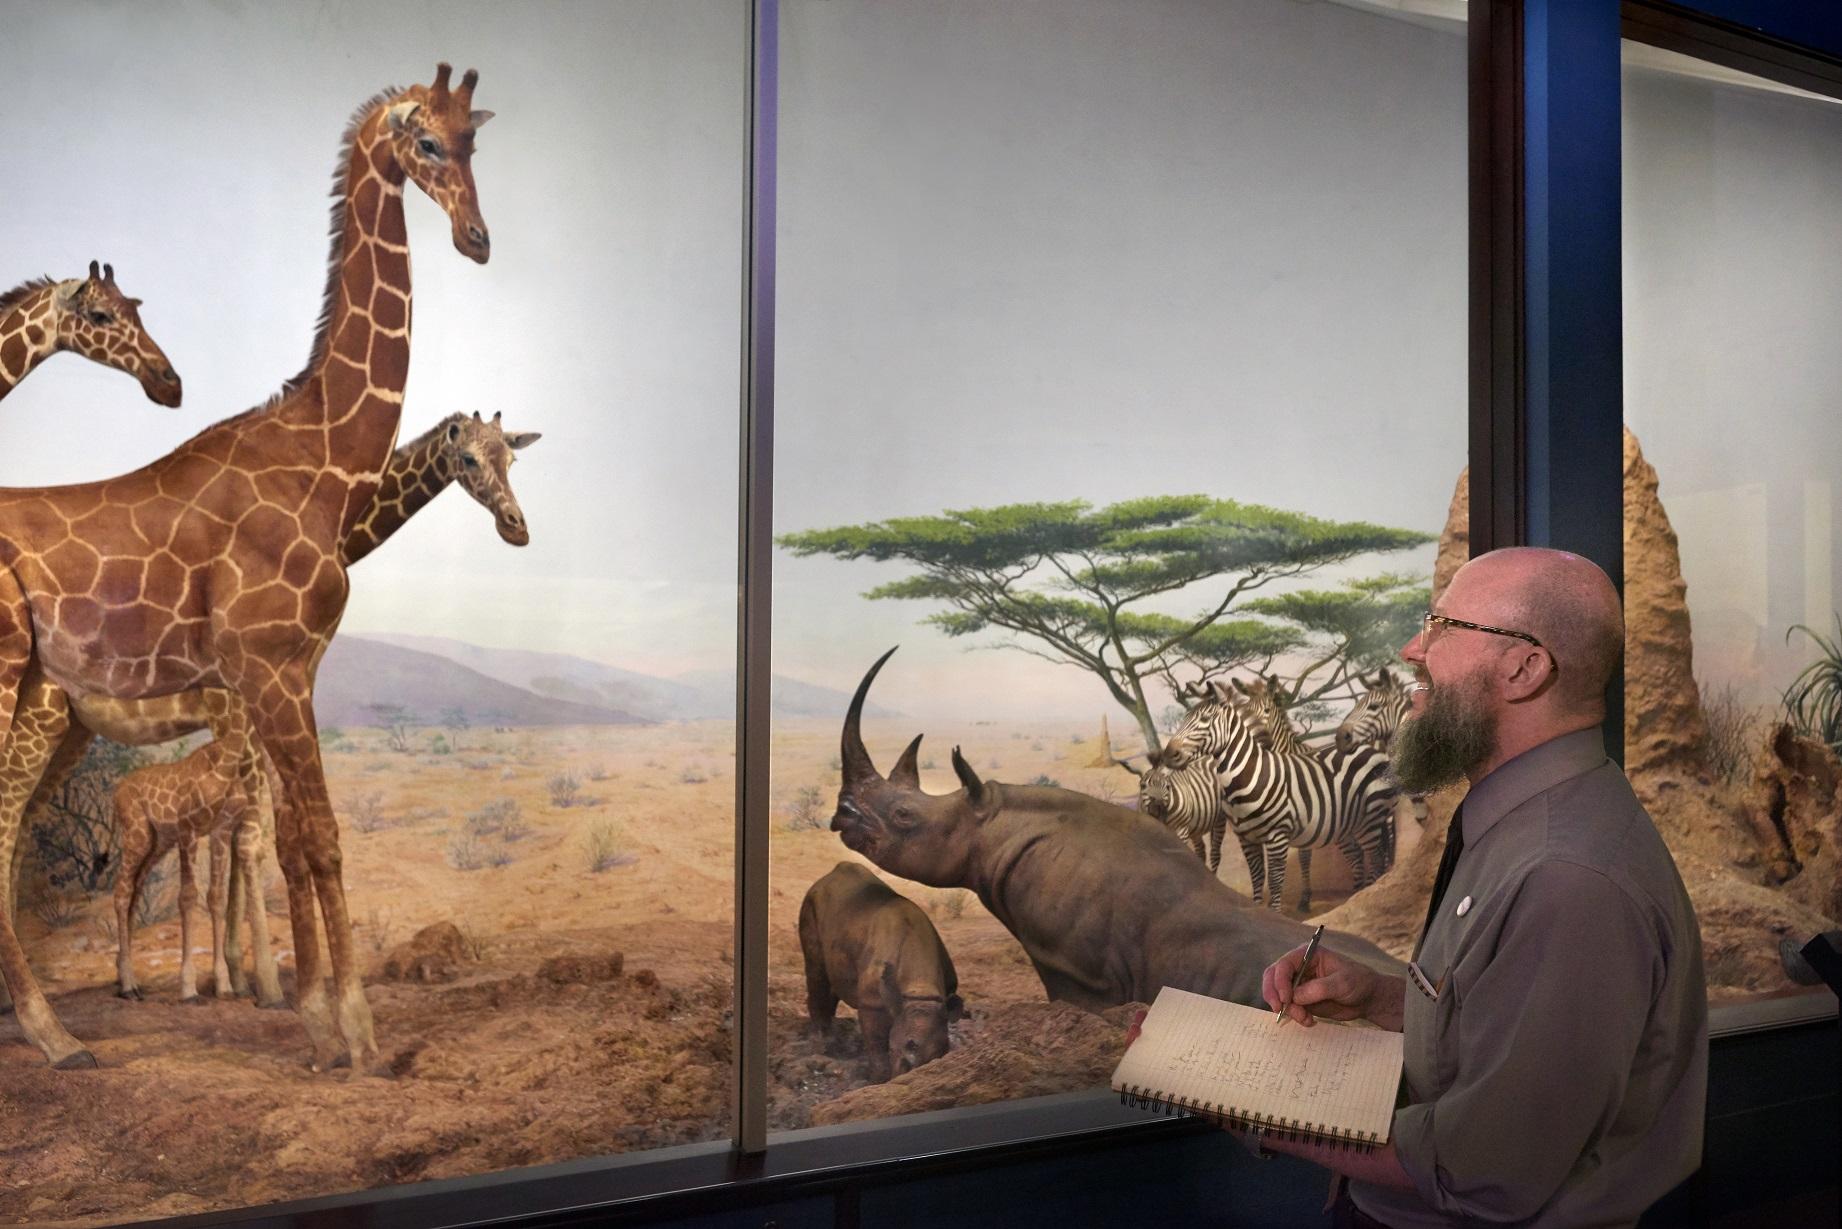 Eric Elshtain takes notes as he tours the Field’s exhibits. (John Weinstein / The Field Museum)